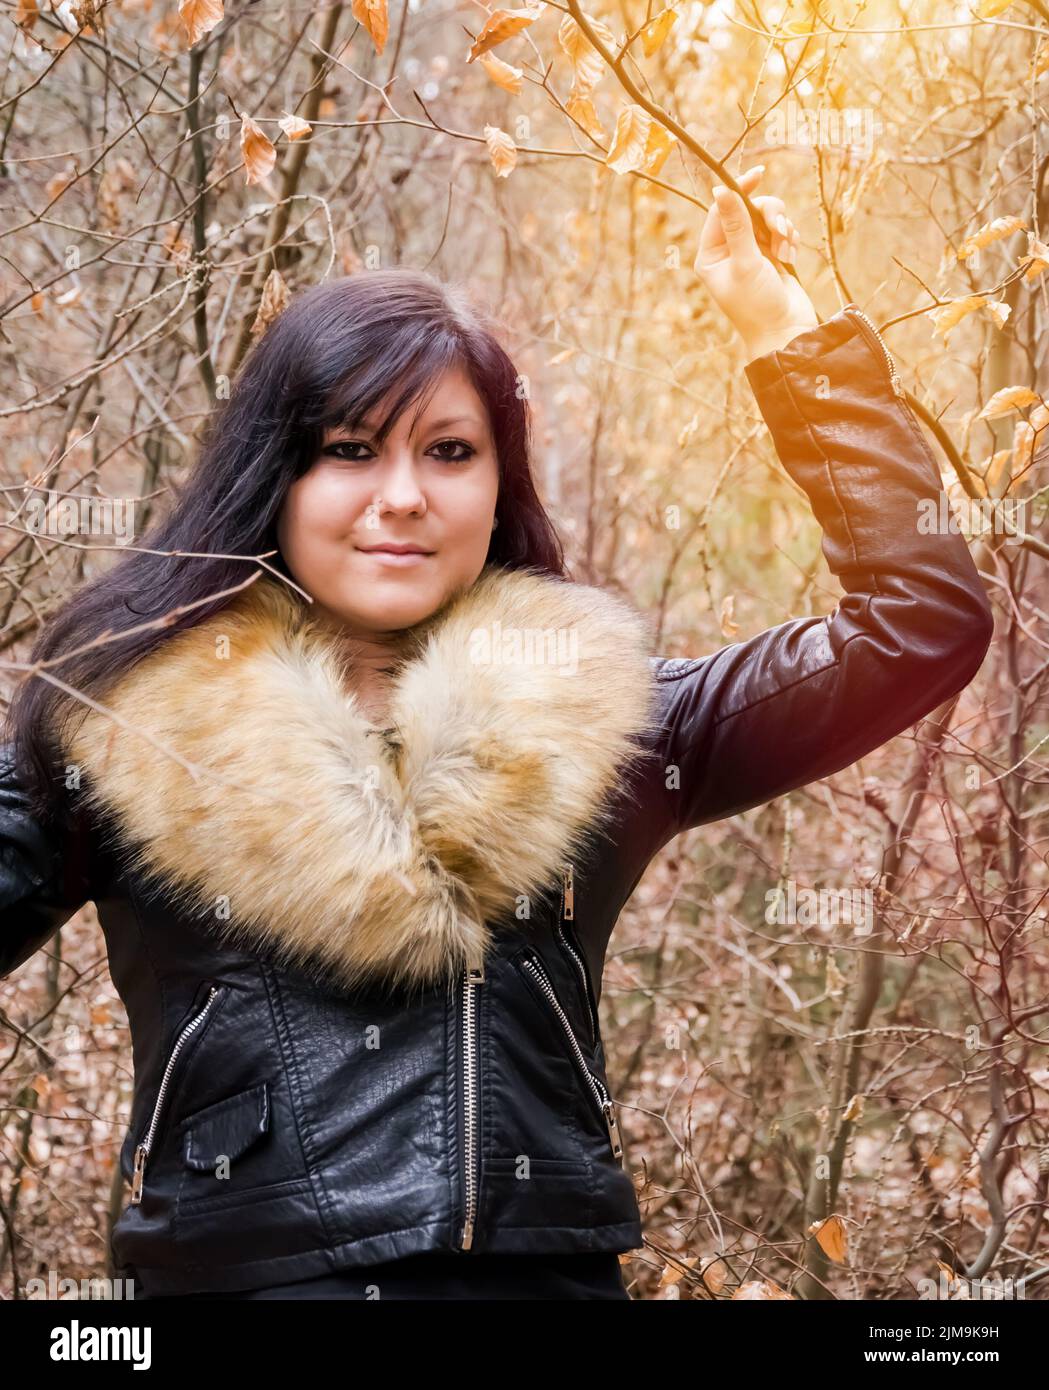 Young woman with fur jacket Stock Photo